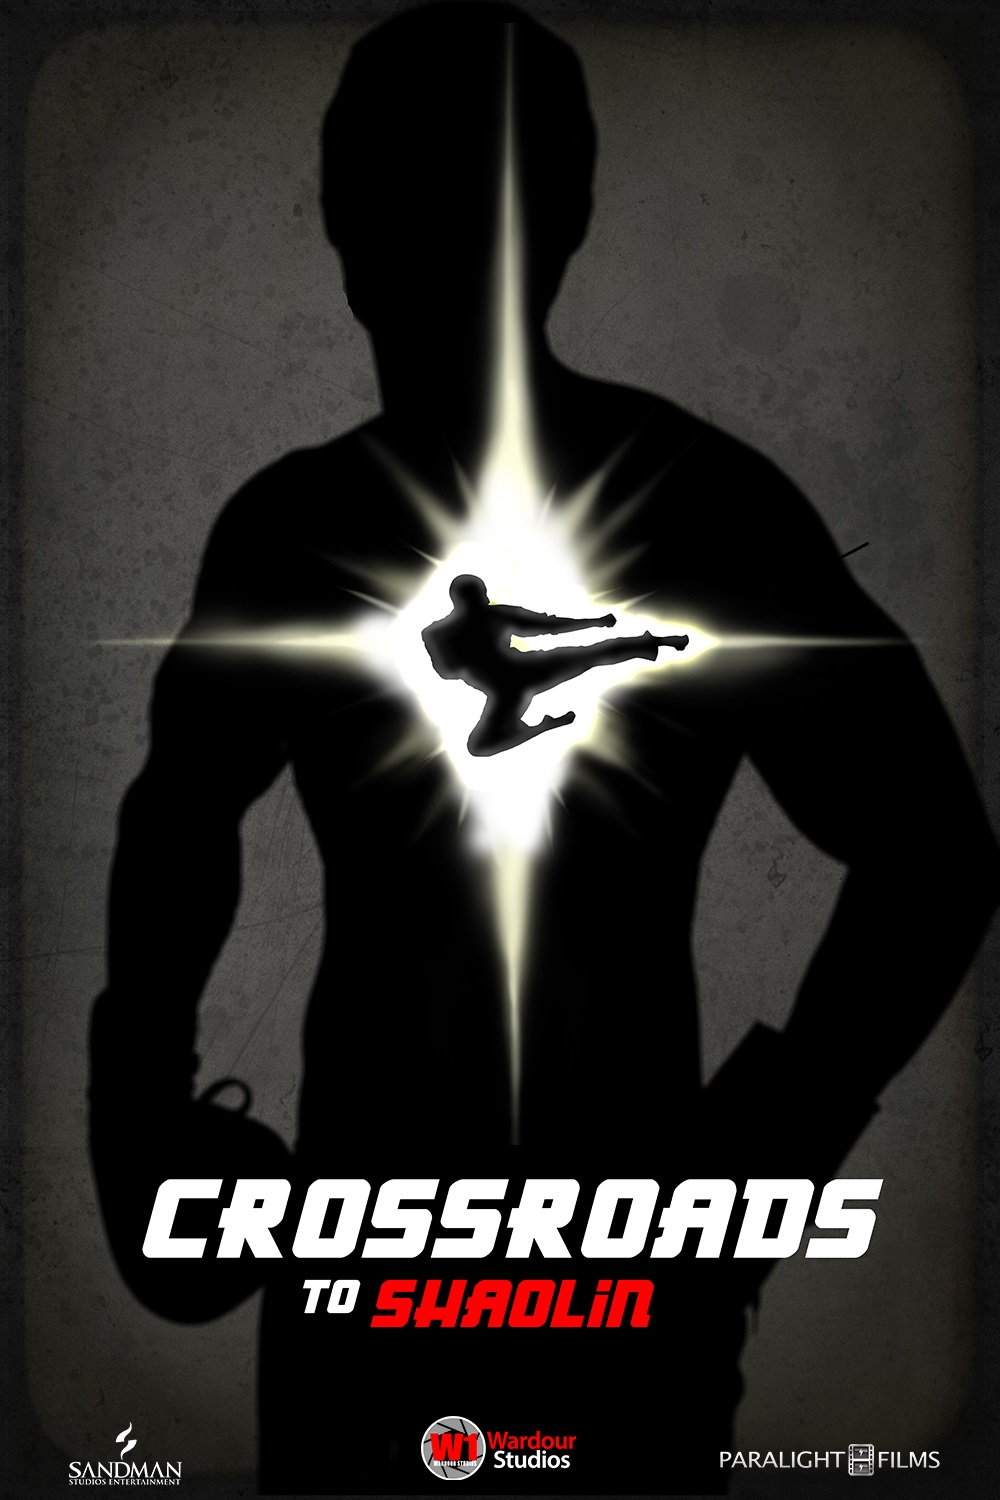 The feature film Crossroads to Shaolin, which is produced by Wardour Studios, will be directed by the extremely talented upcoming director, Lee Baker.